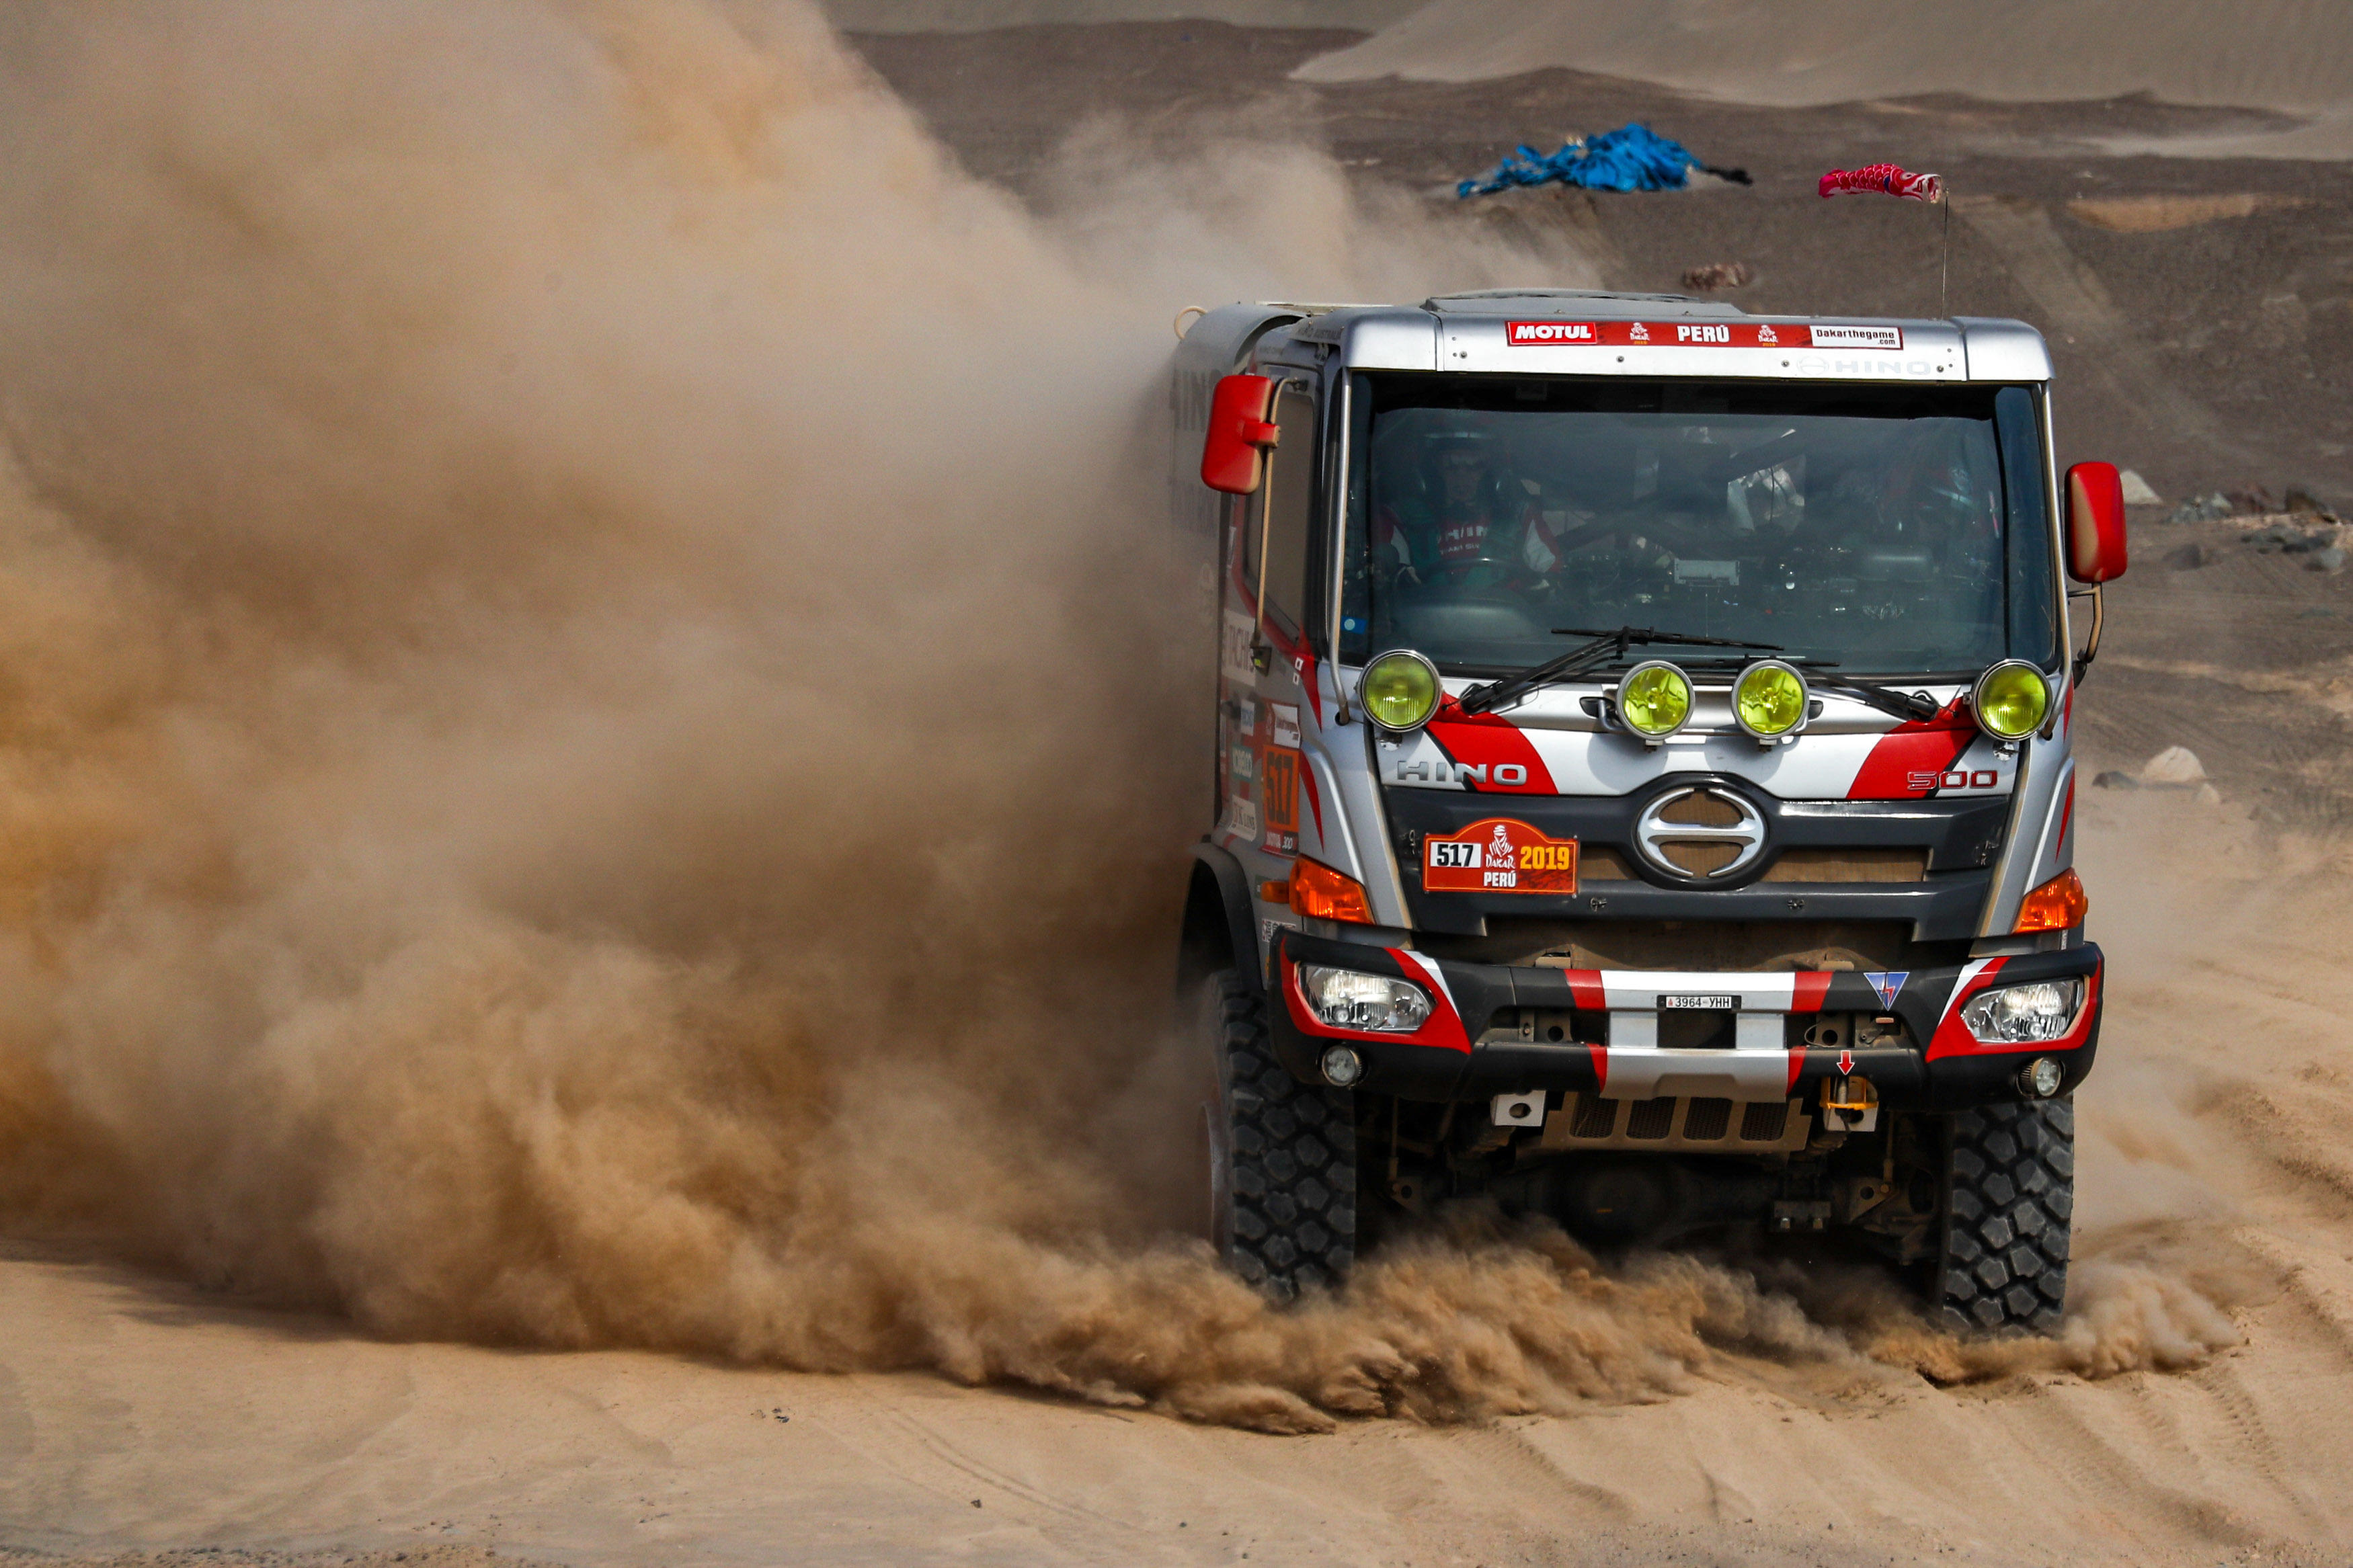 [DAY 8: Stage 6] First Day of the Second Week Features the Longest Stage of the Event. Team's Truck Overcomes Dunes to Finish in 9th Place.